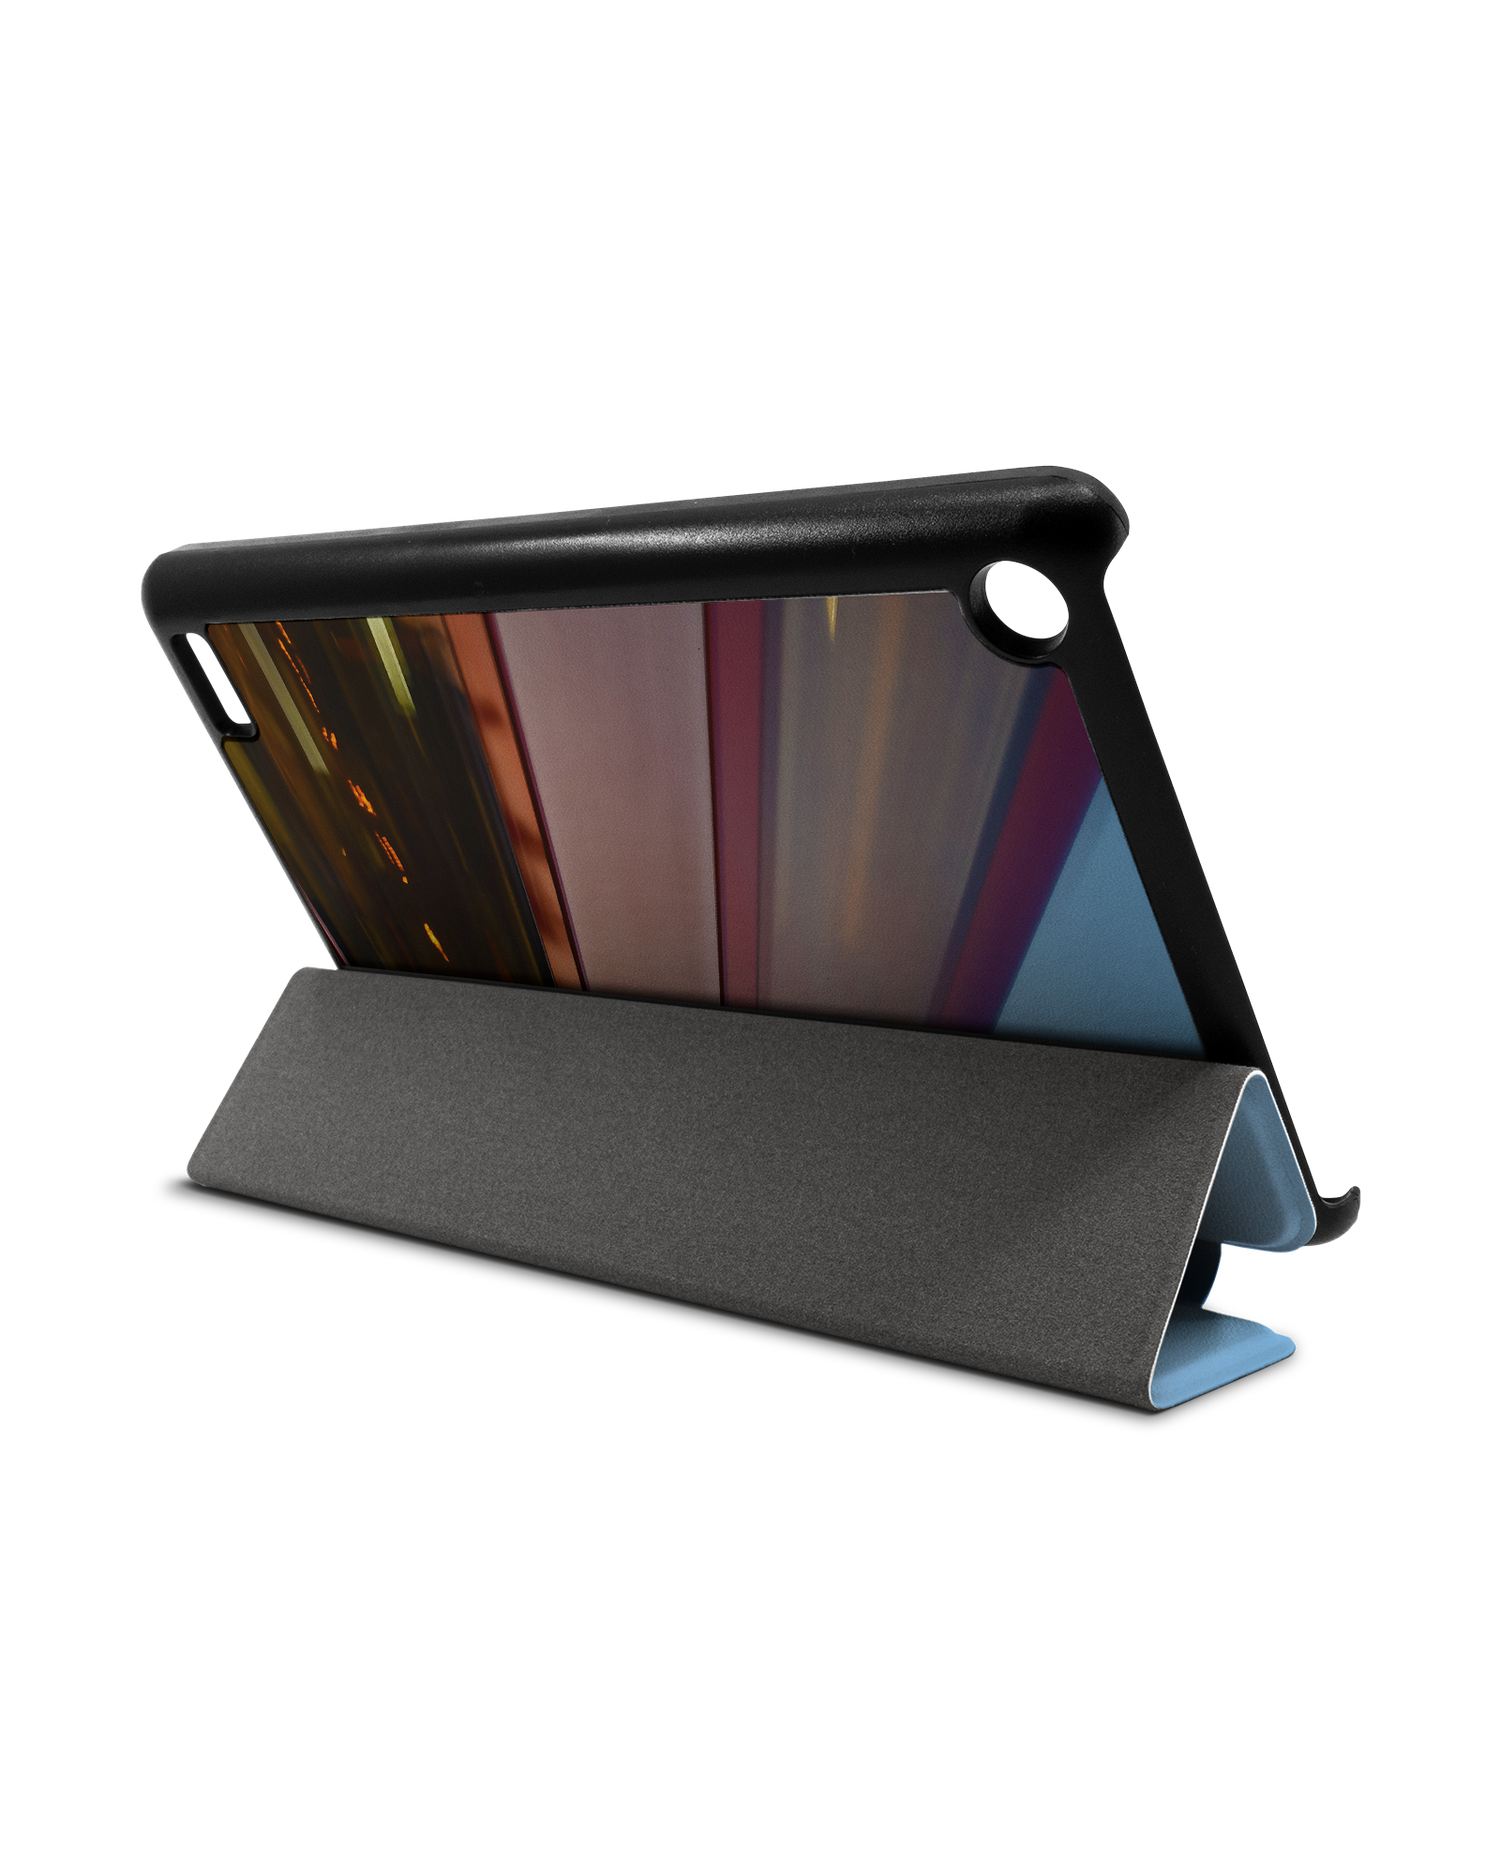 London Tablet Smart Case for Amazon Fire 7: Used as Stand